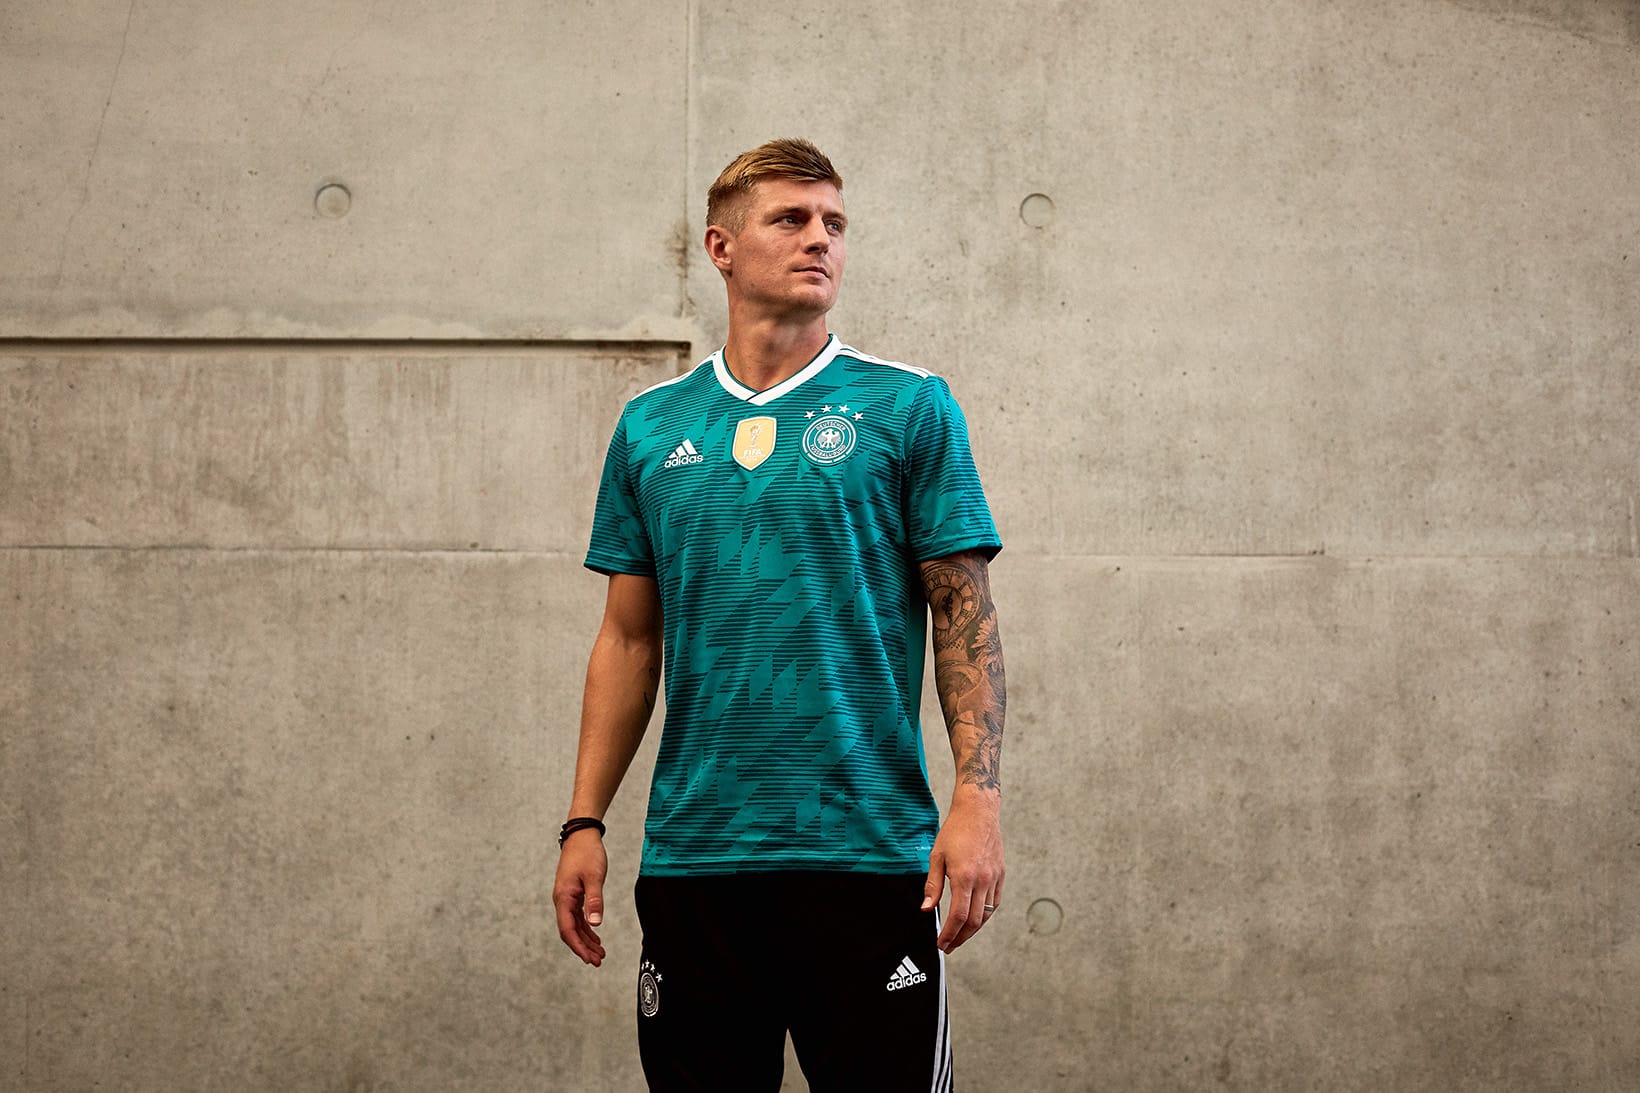 adidas 2018 World Cup Kits for Germany 